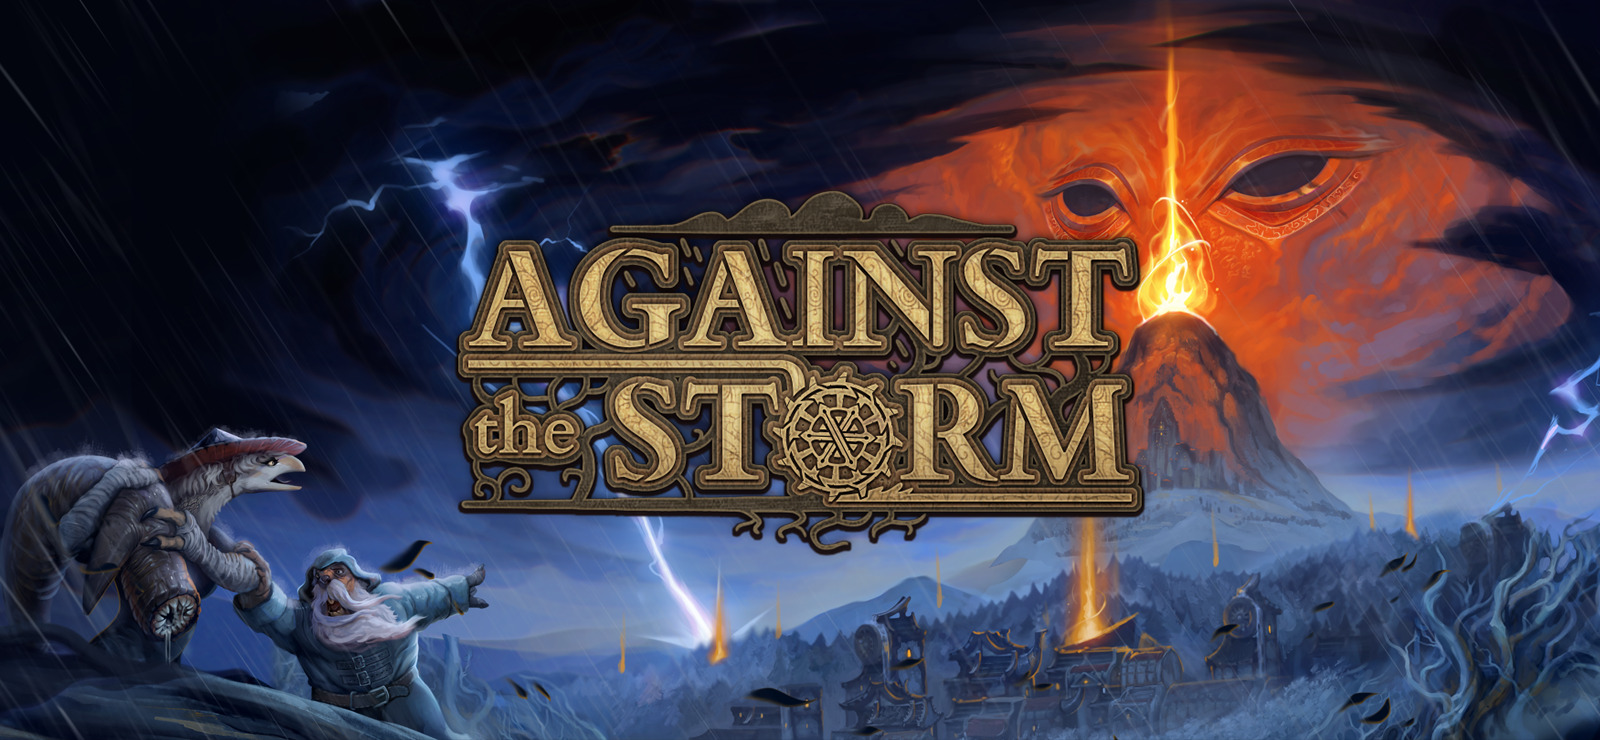 Against the Storm - Codex Gamicus - Humanity's collective gaming